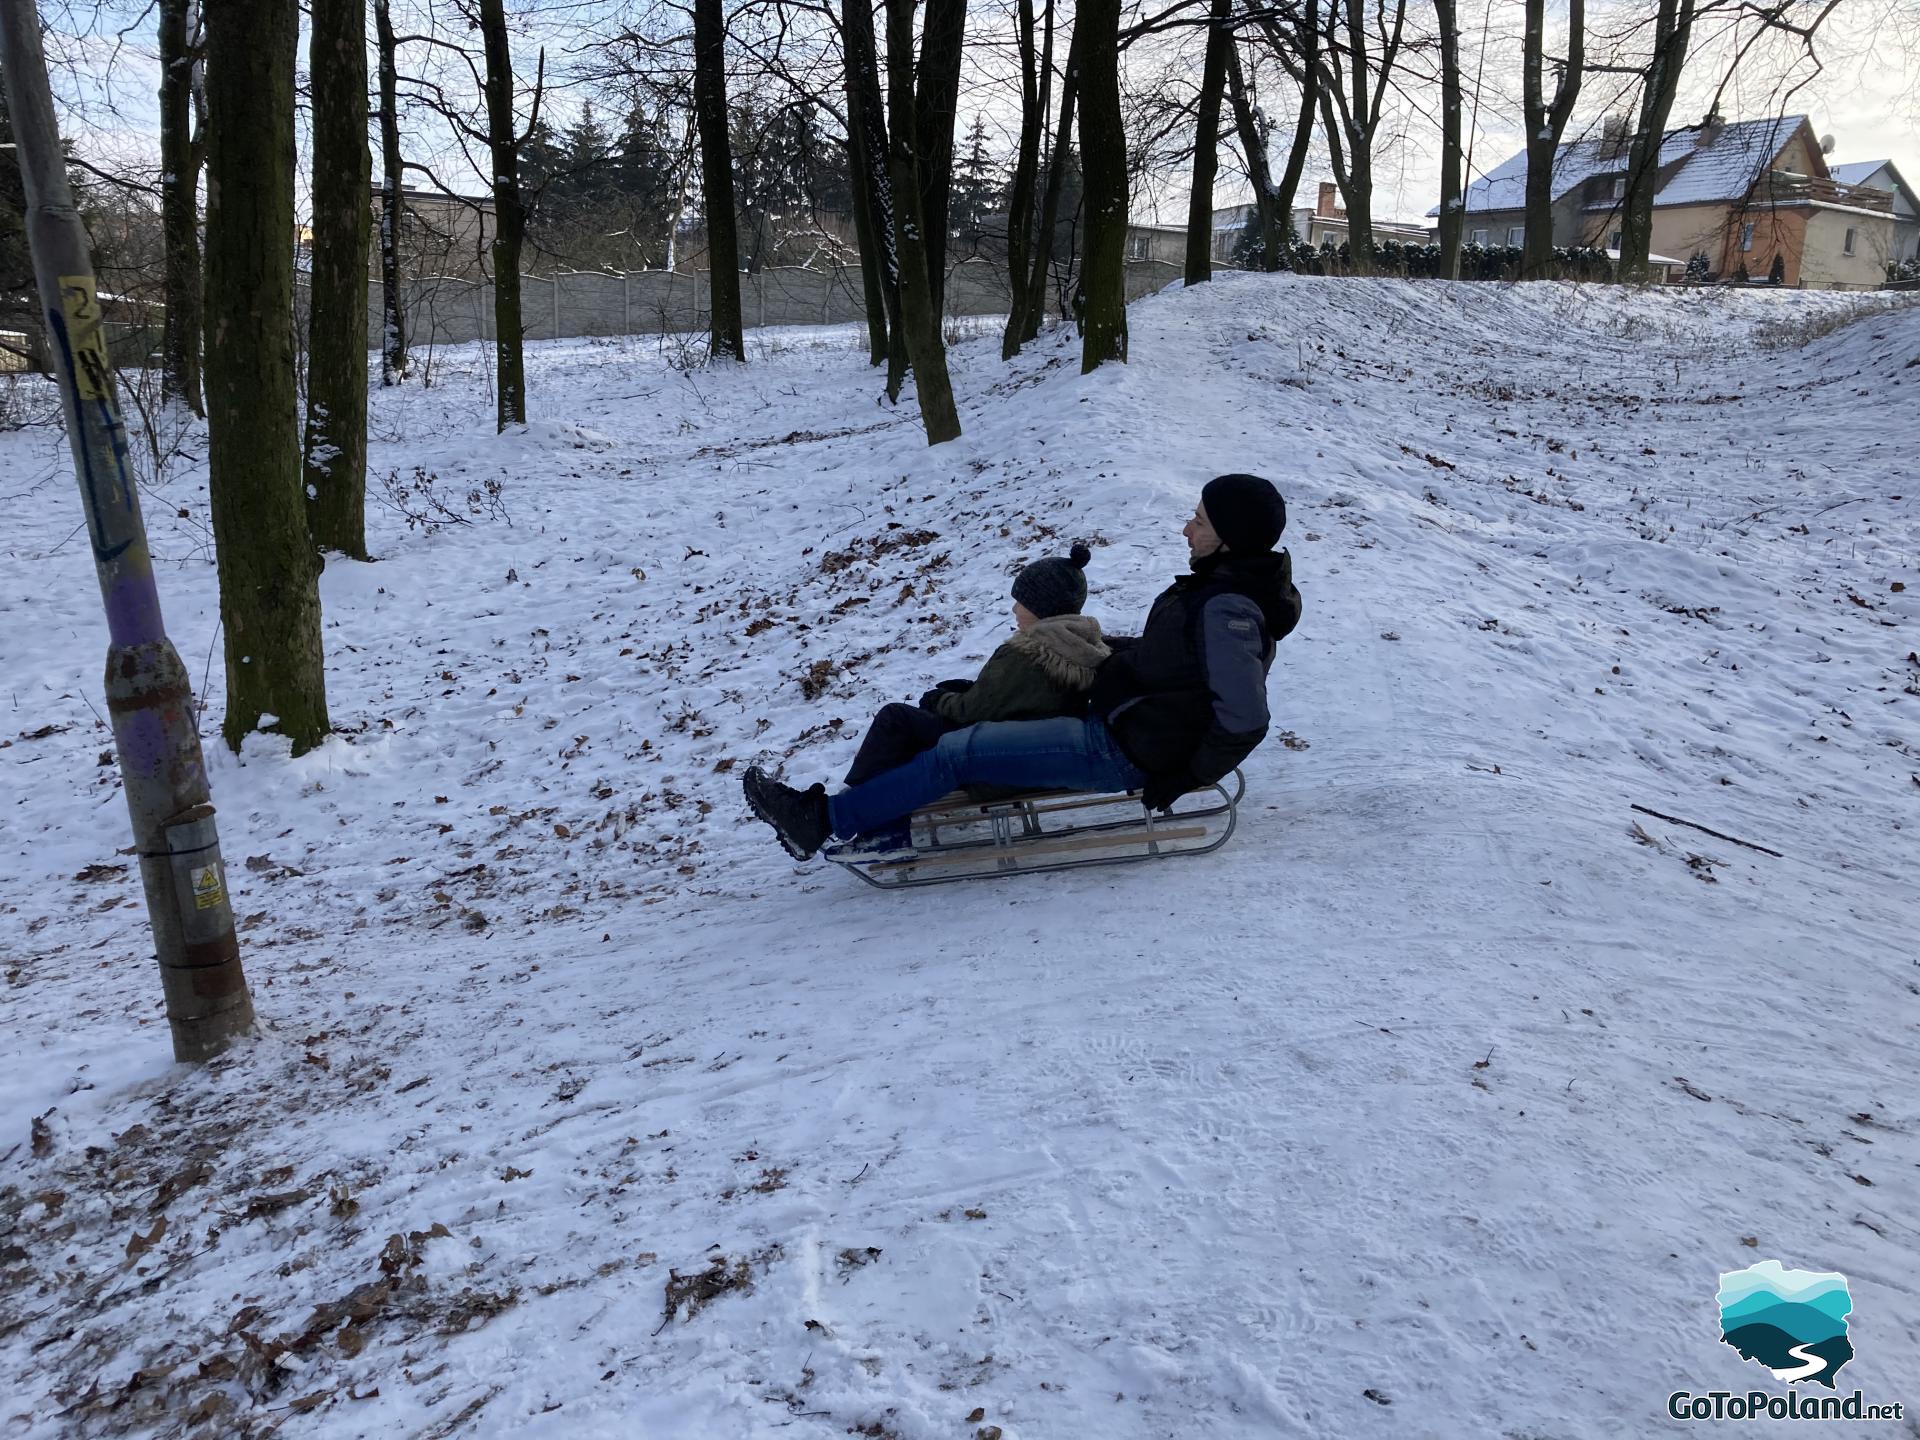 A young boy and his father sledding together